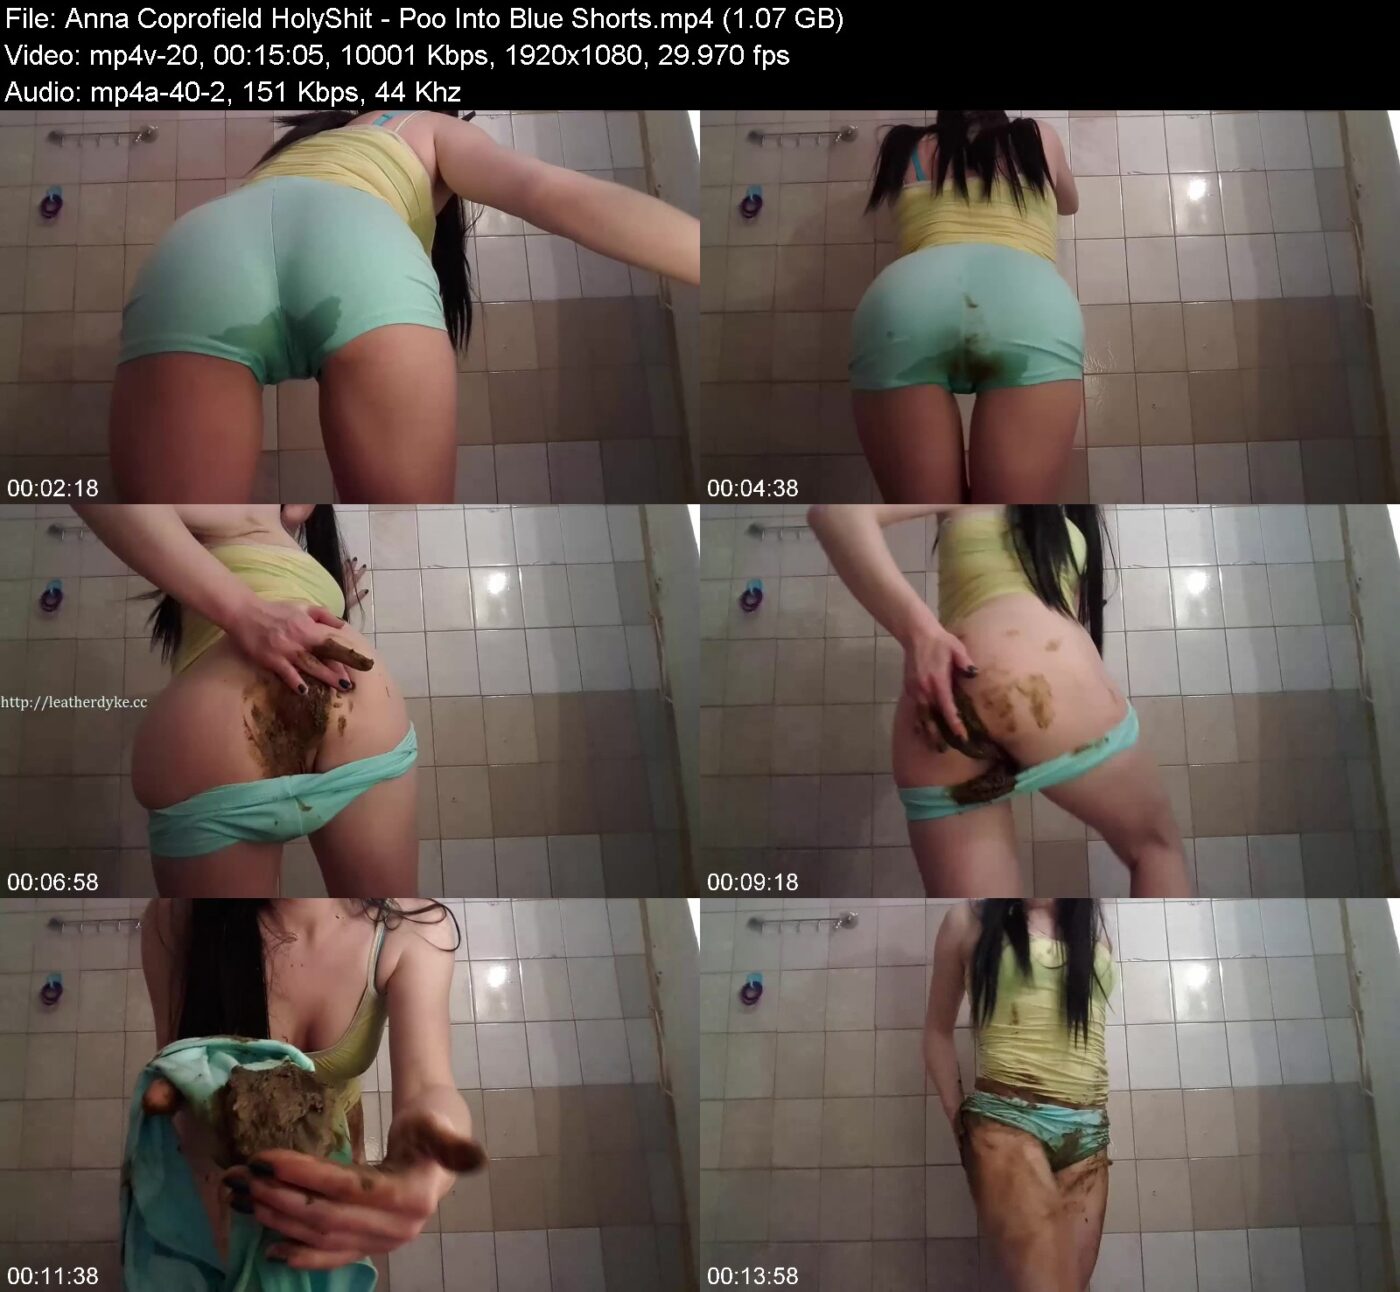 Anna Coprofield HolyShit in Poo Into Blue Shorts